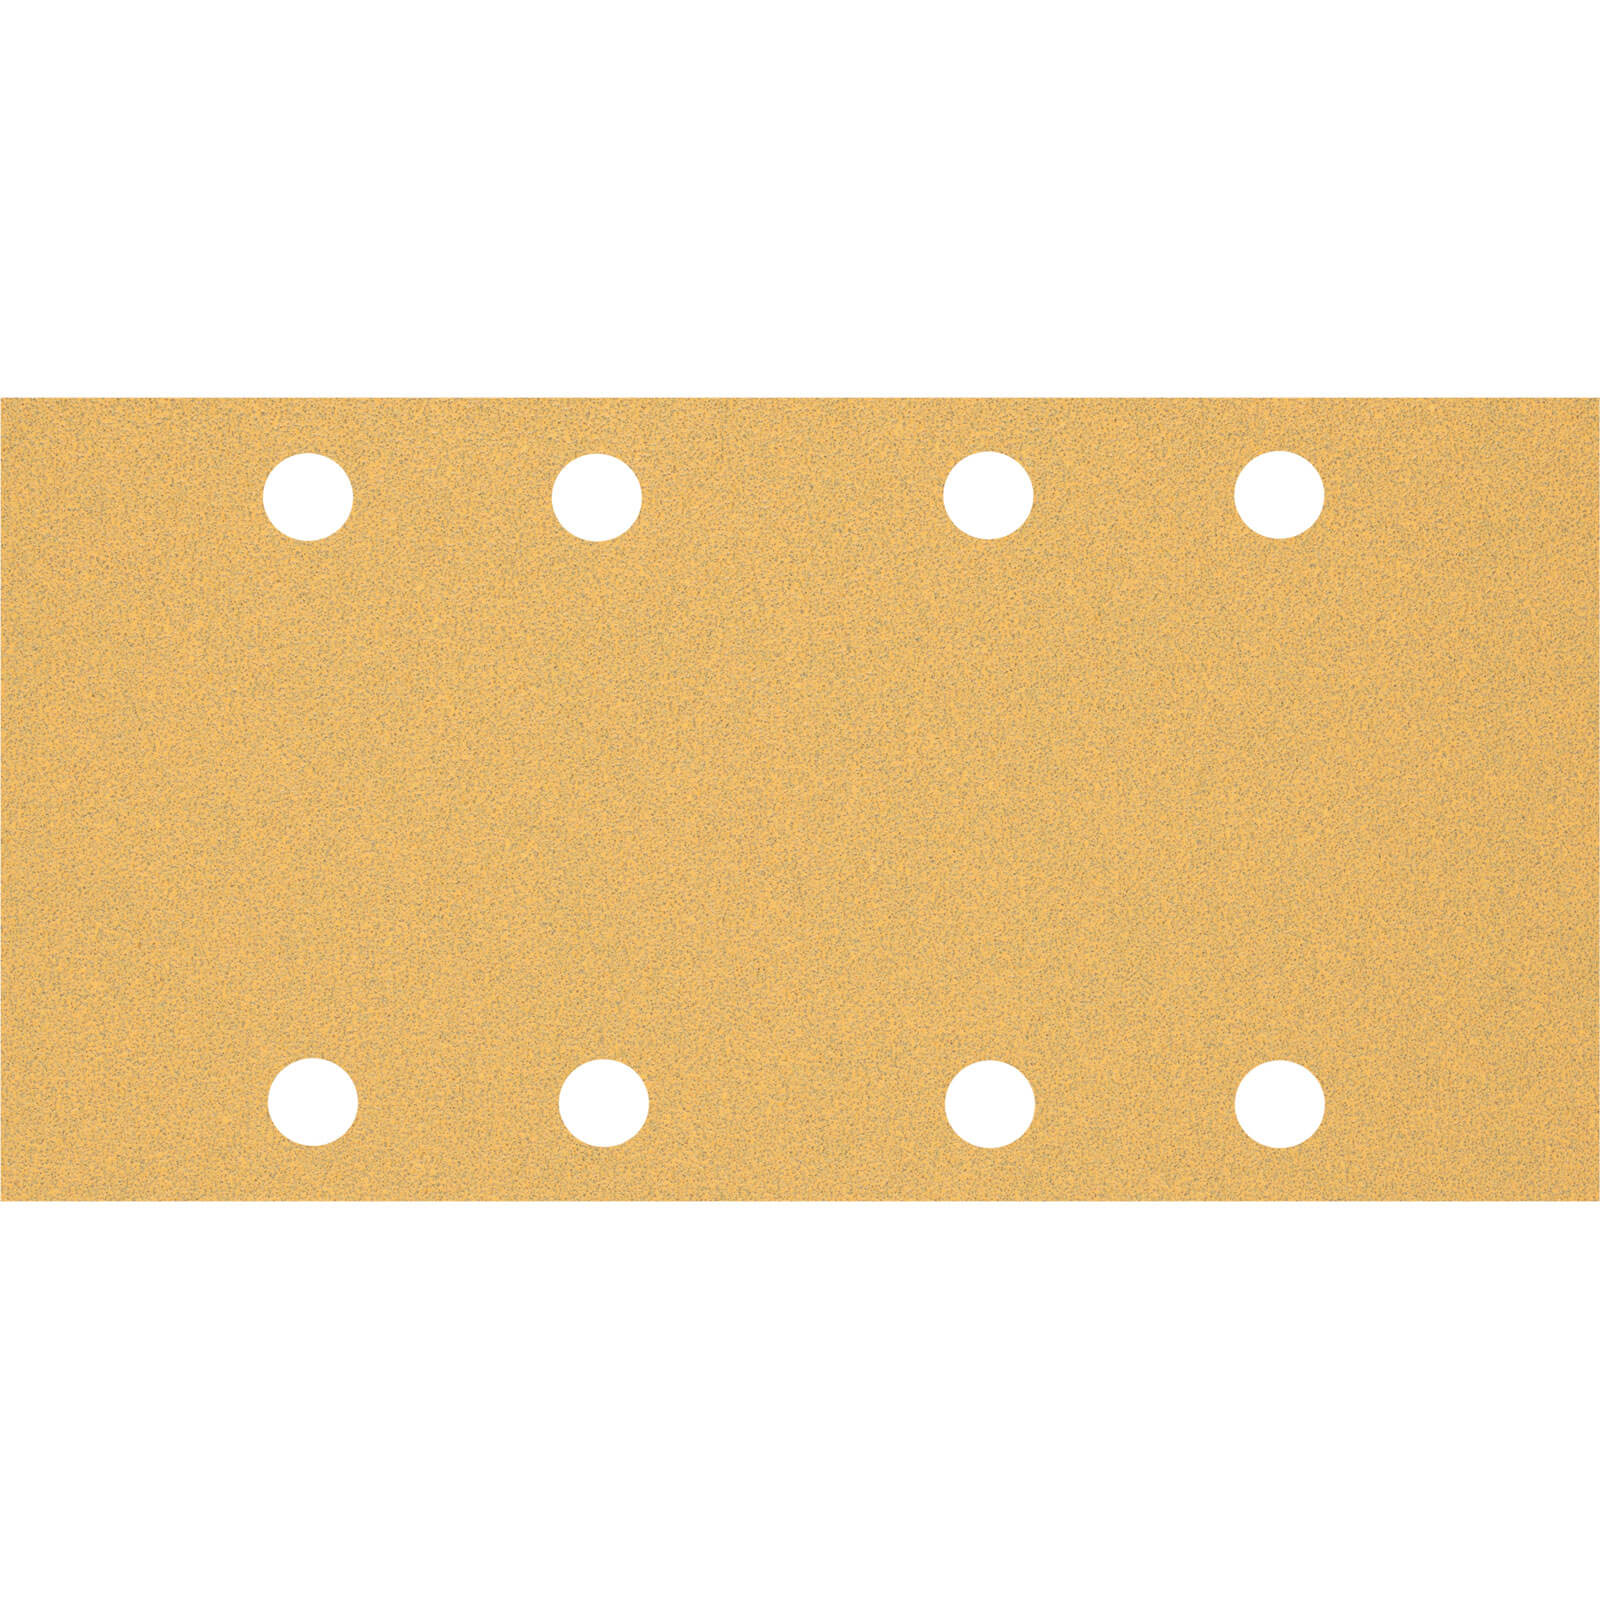 Image of Bosch Expert C470 Punched Hook and Loop Sanding Sheets 93mm x 186mm 80g Pack of 50